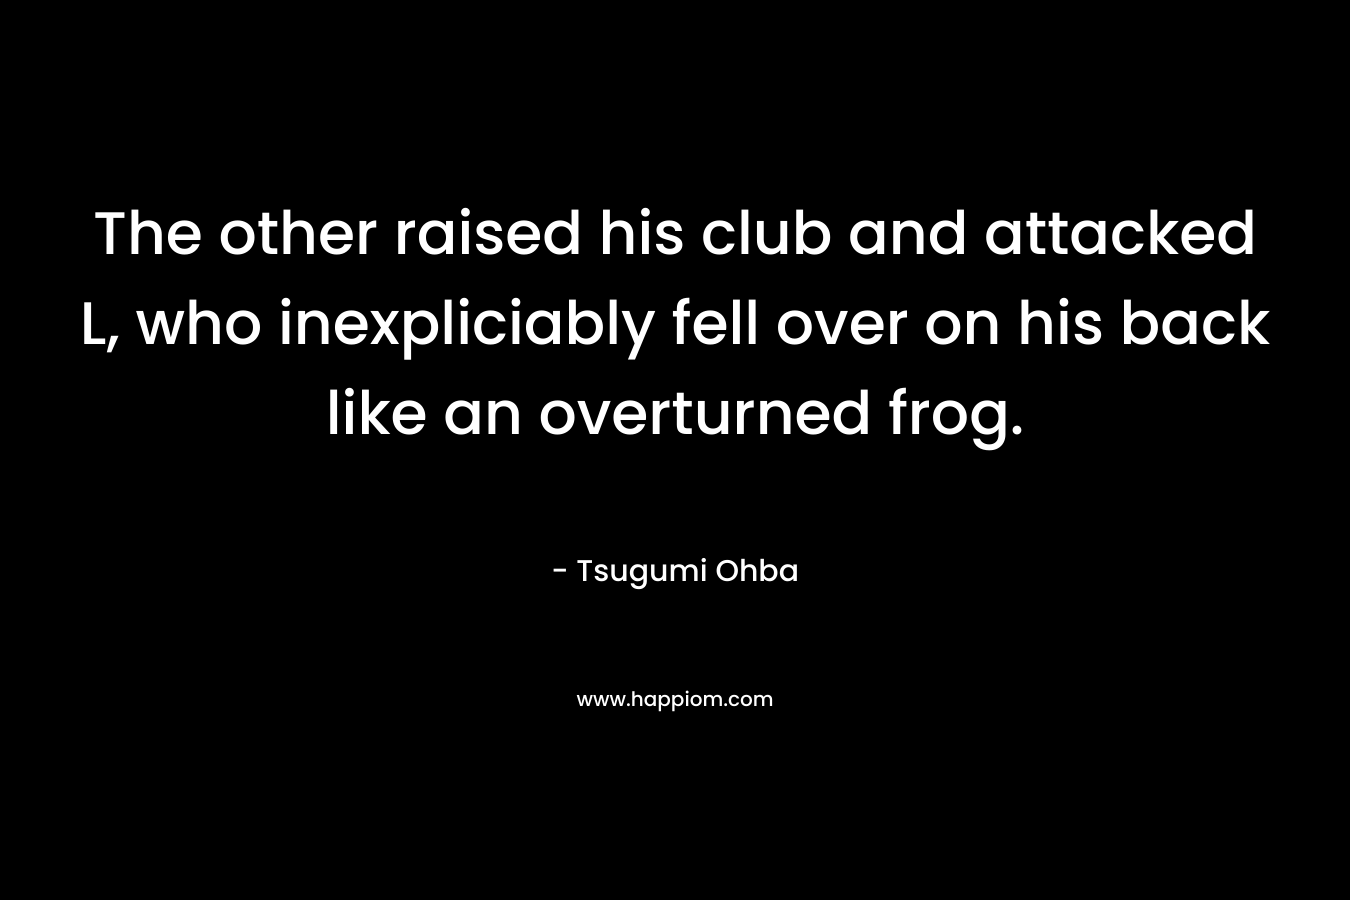 The other raised his club and attacked L, who inexpliciably fell over on his back like an overturned frog.